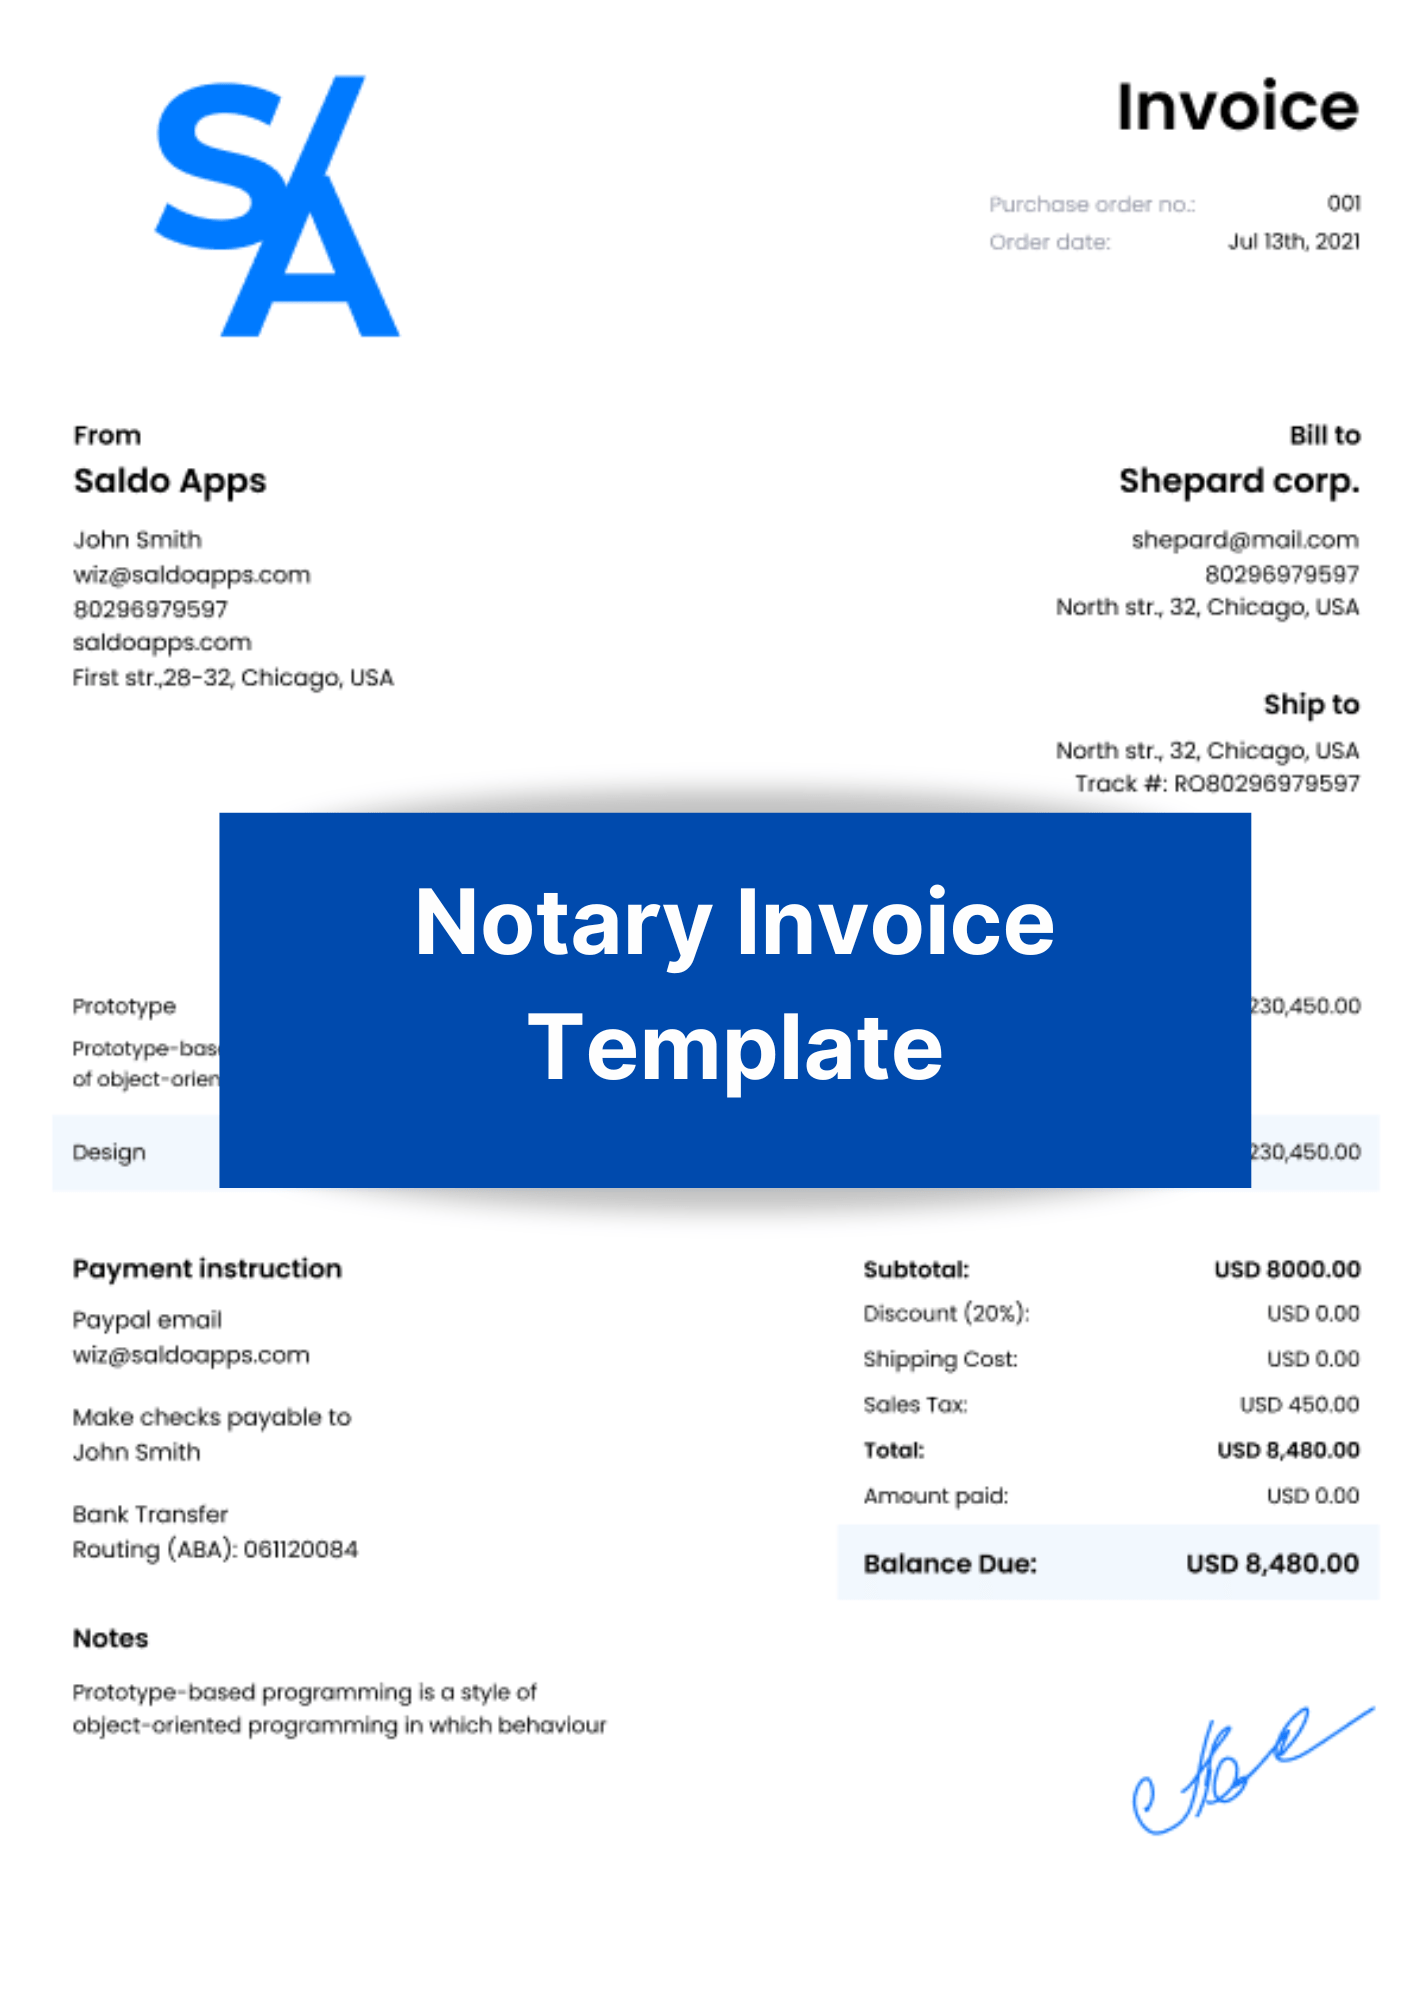 Notary Invoice Template - Edit I Download - Saldoinvoice